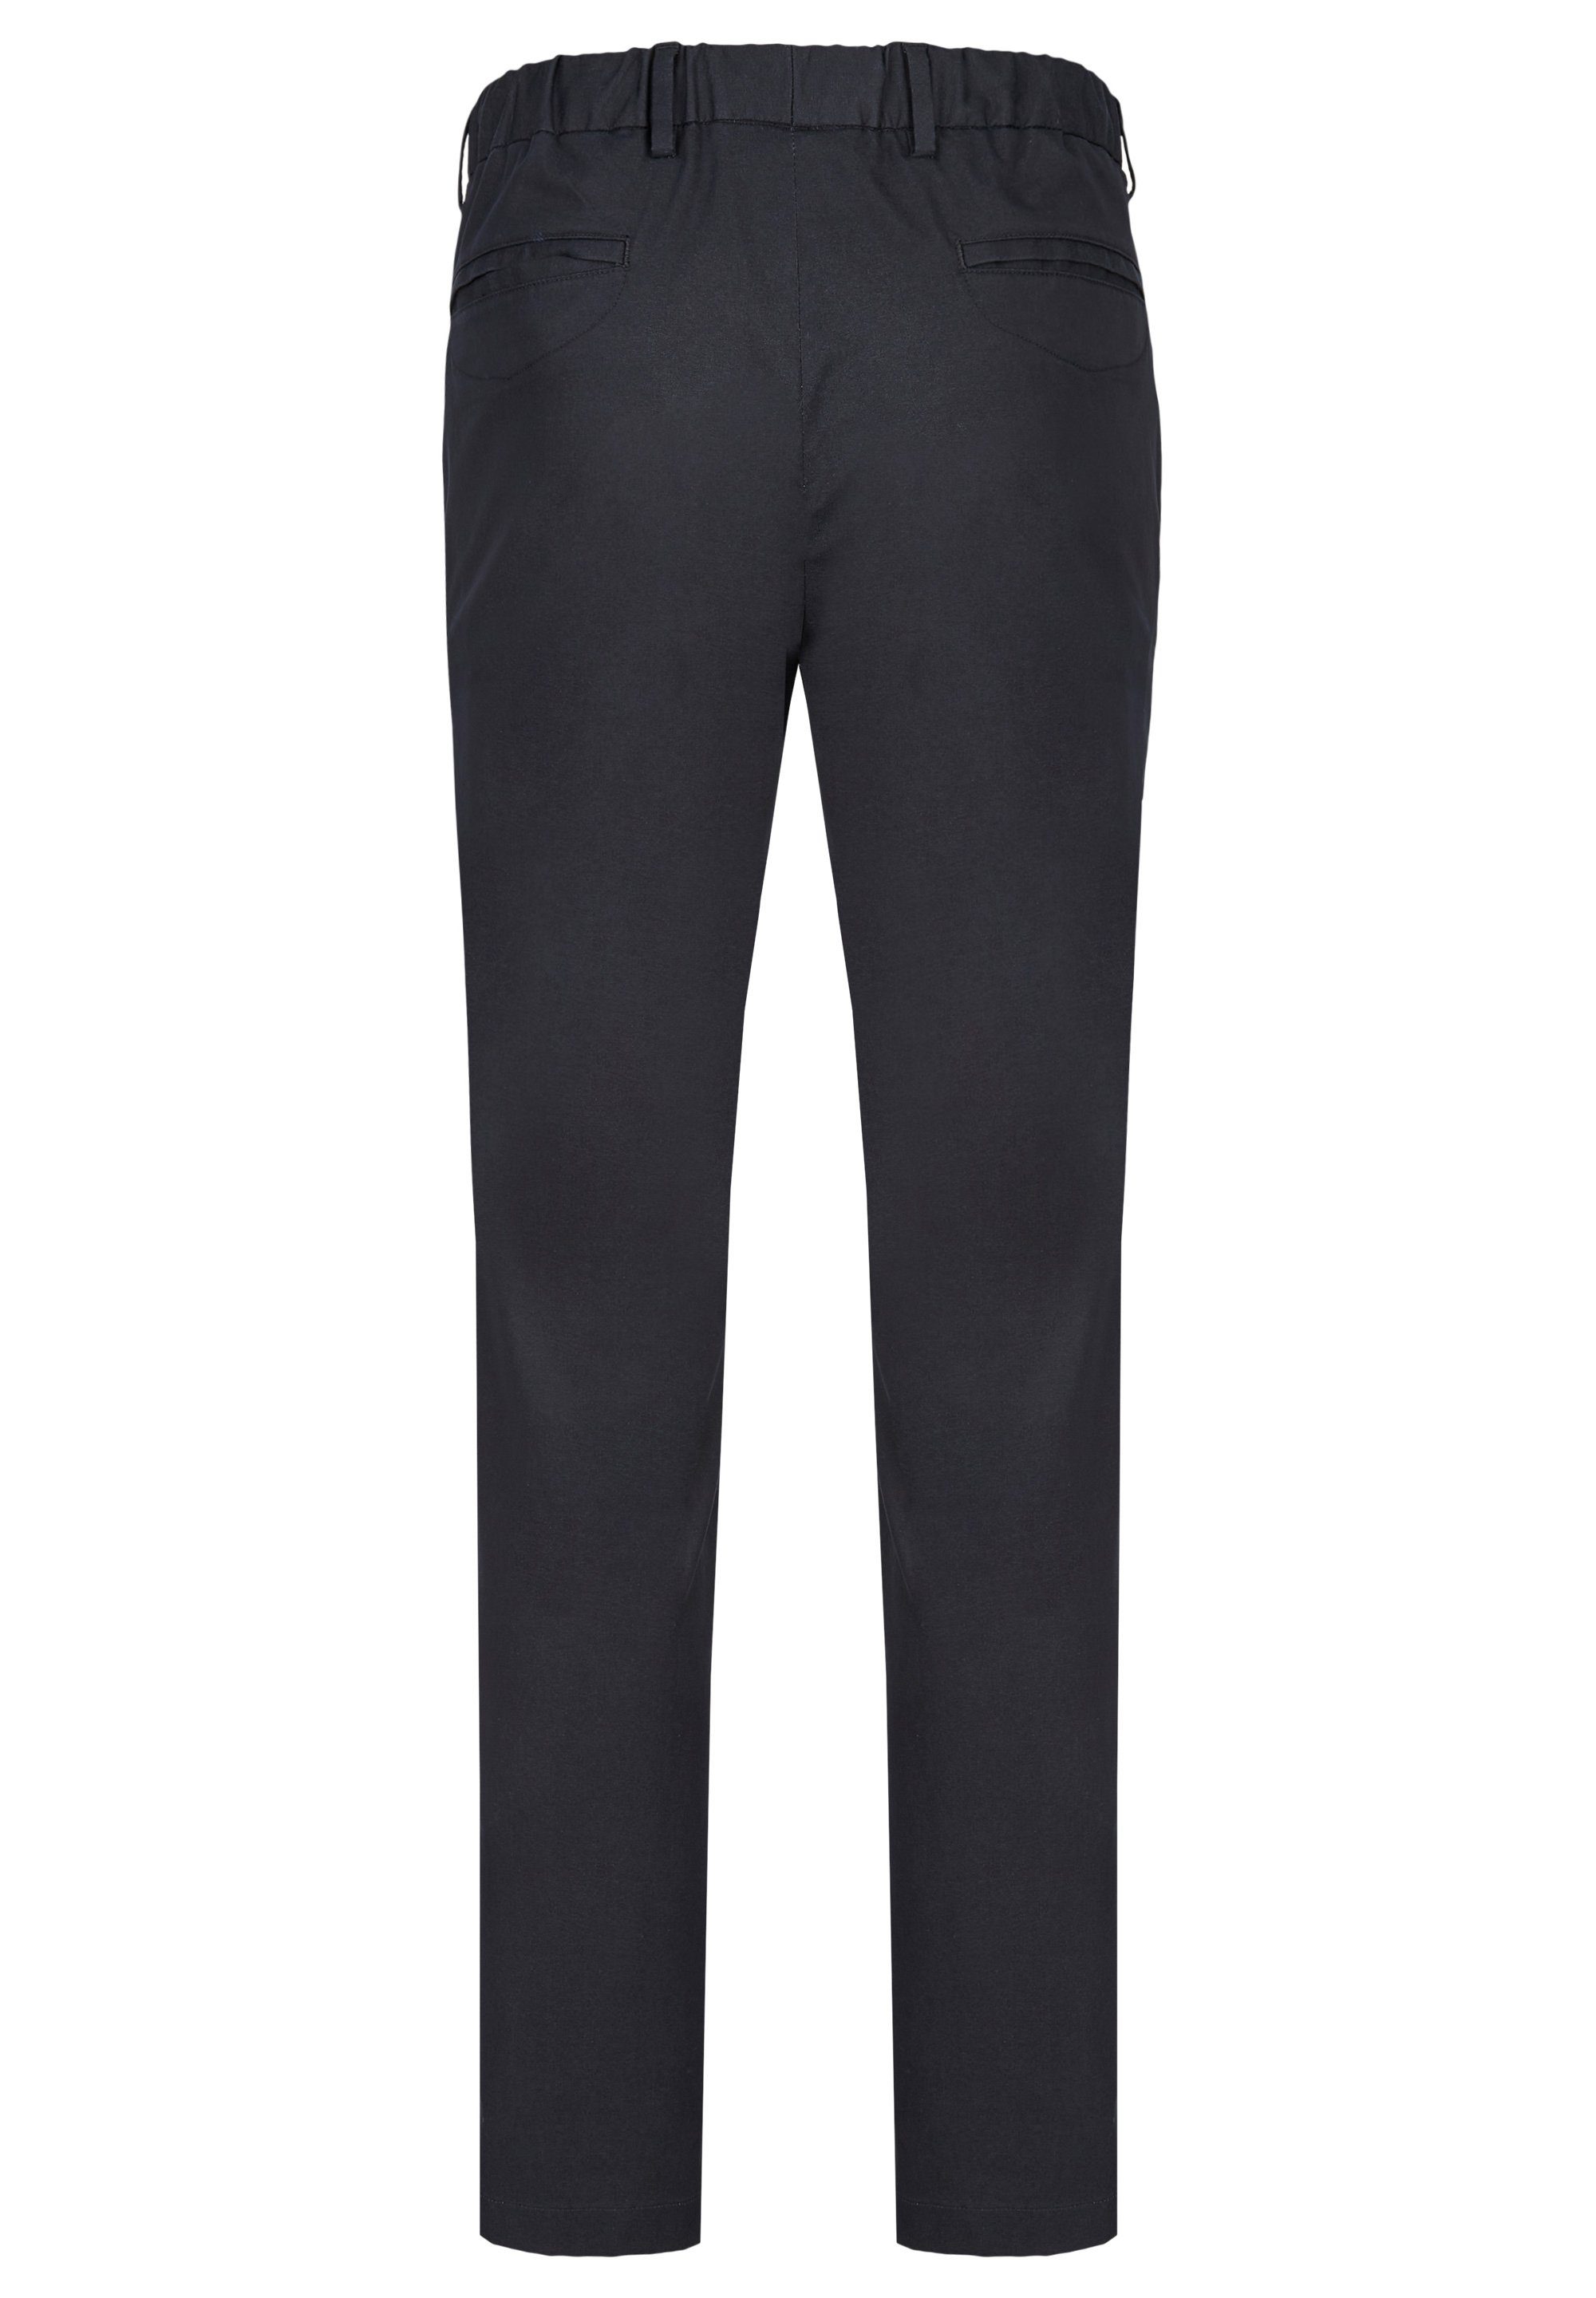 PARIS HECHTER Allrounders Stoffhose Trousers Komfortstretch navy